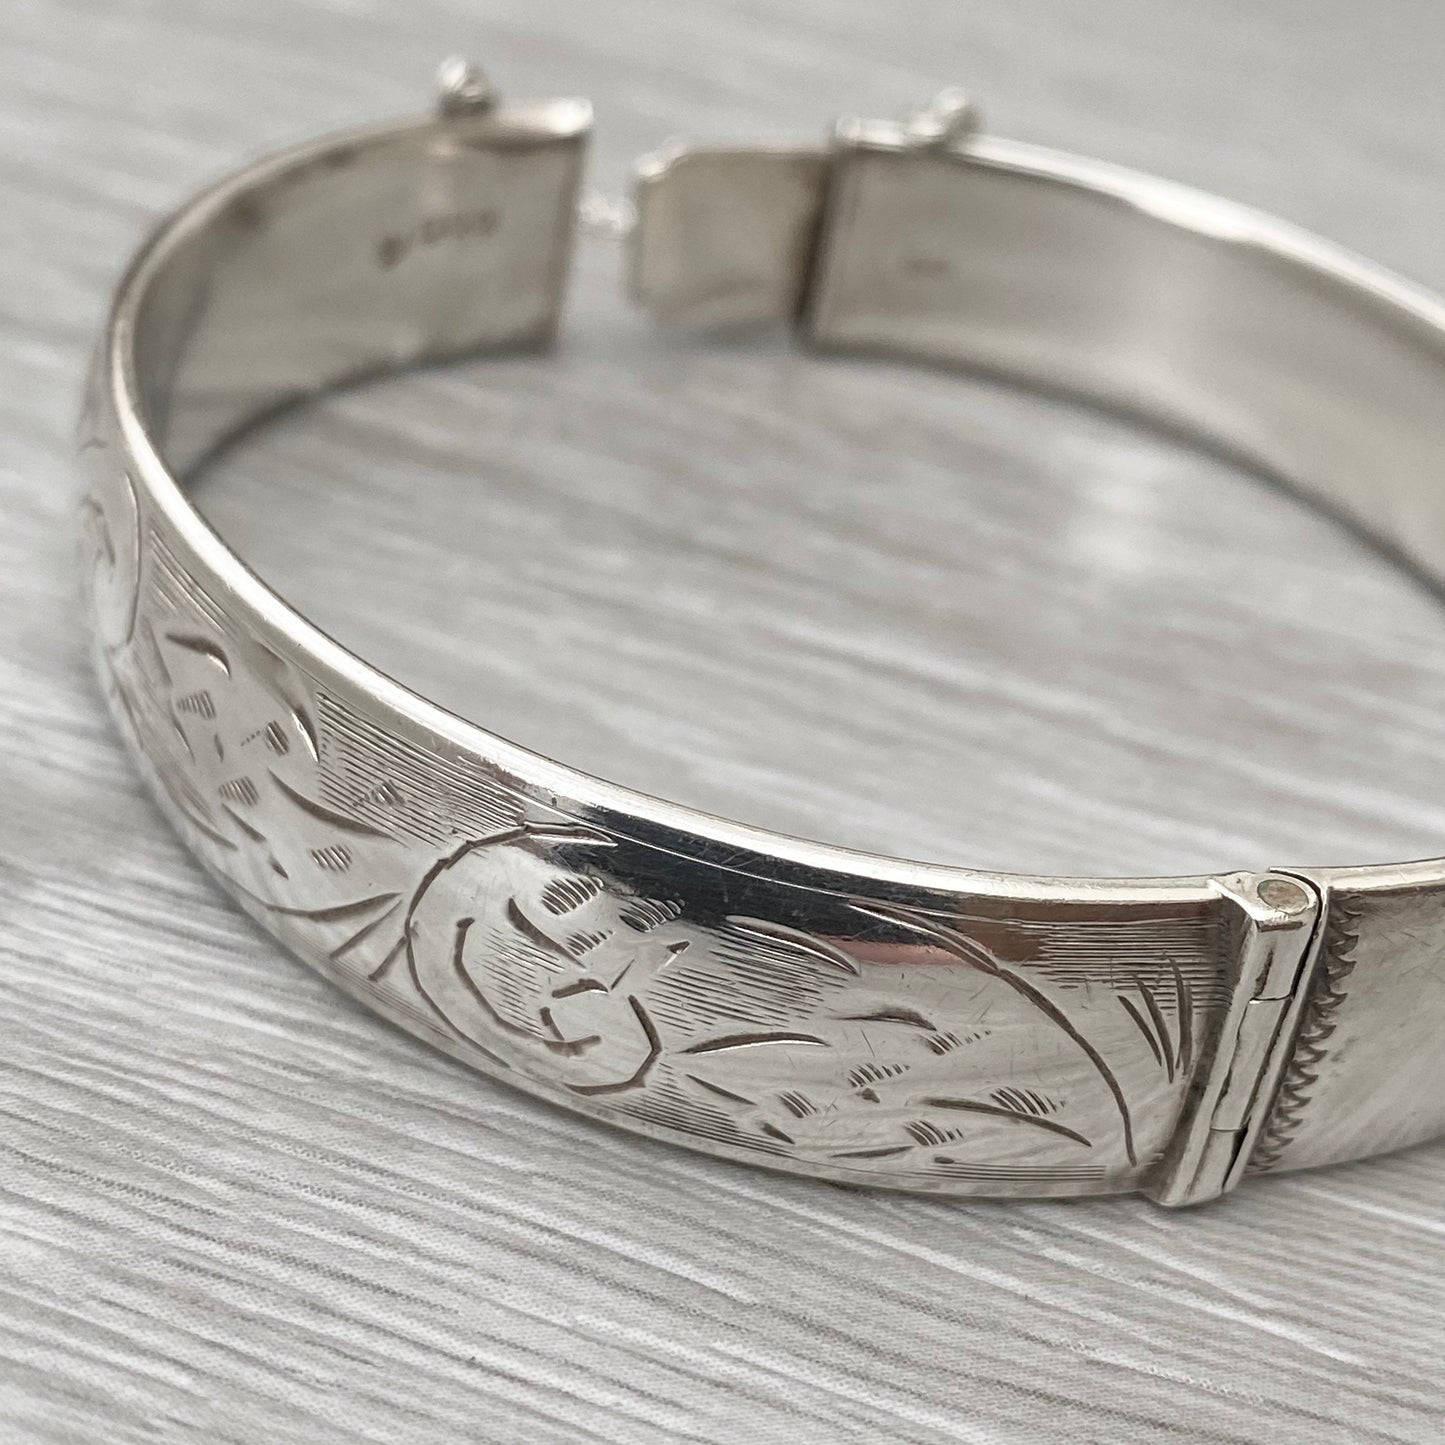 Vintage sterling silver engraved cuff bangle - 1960s